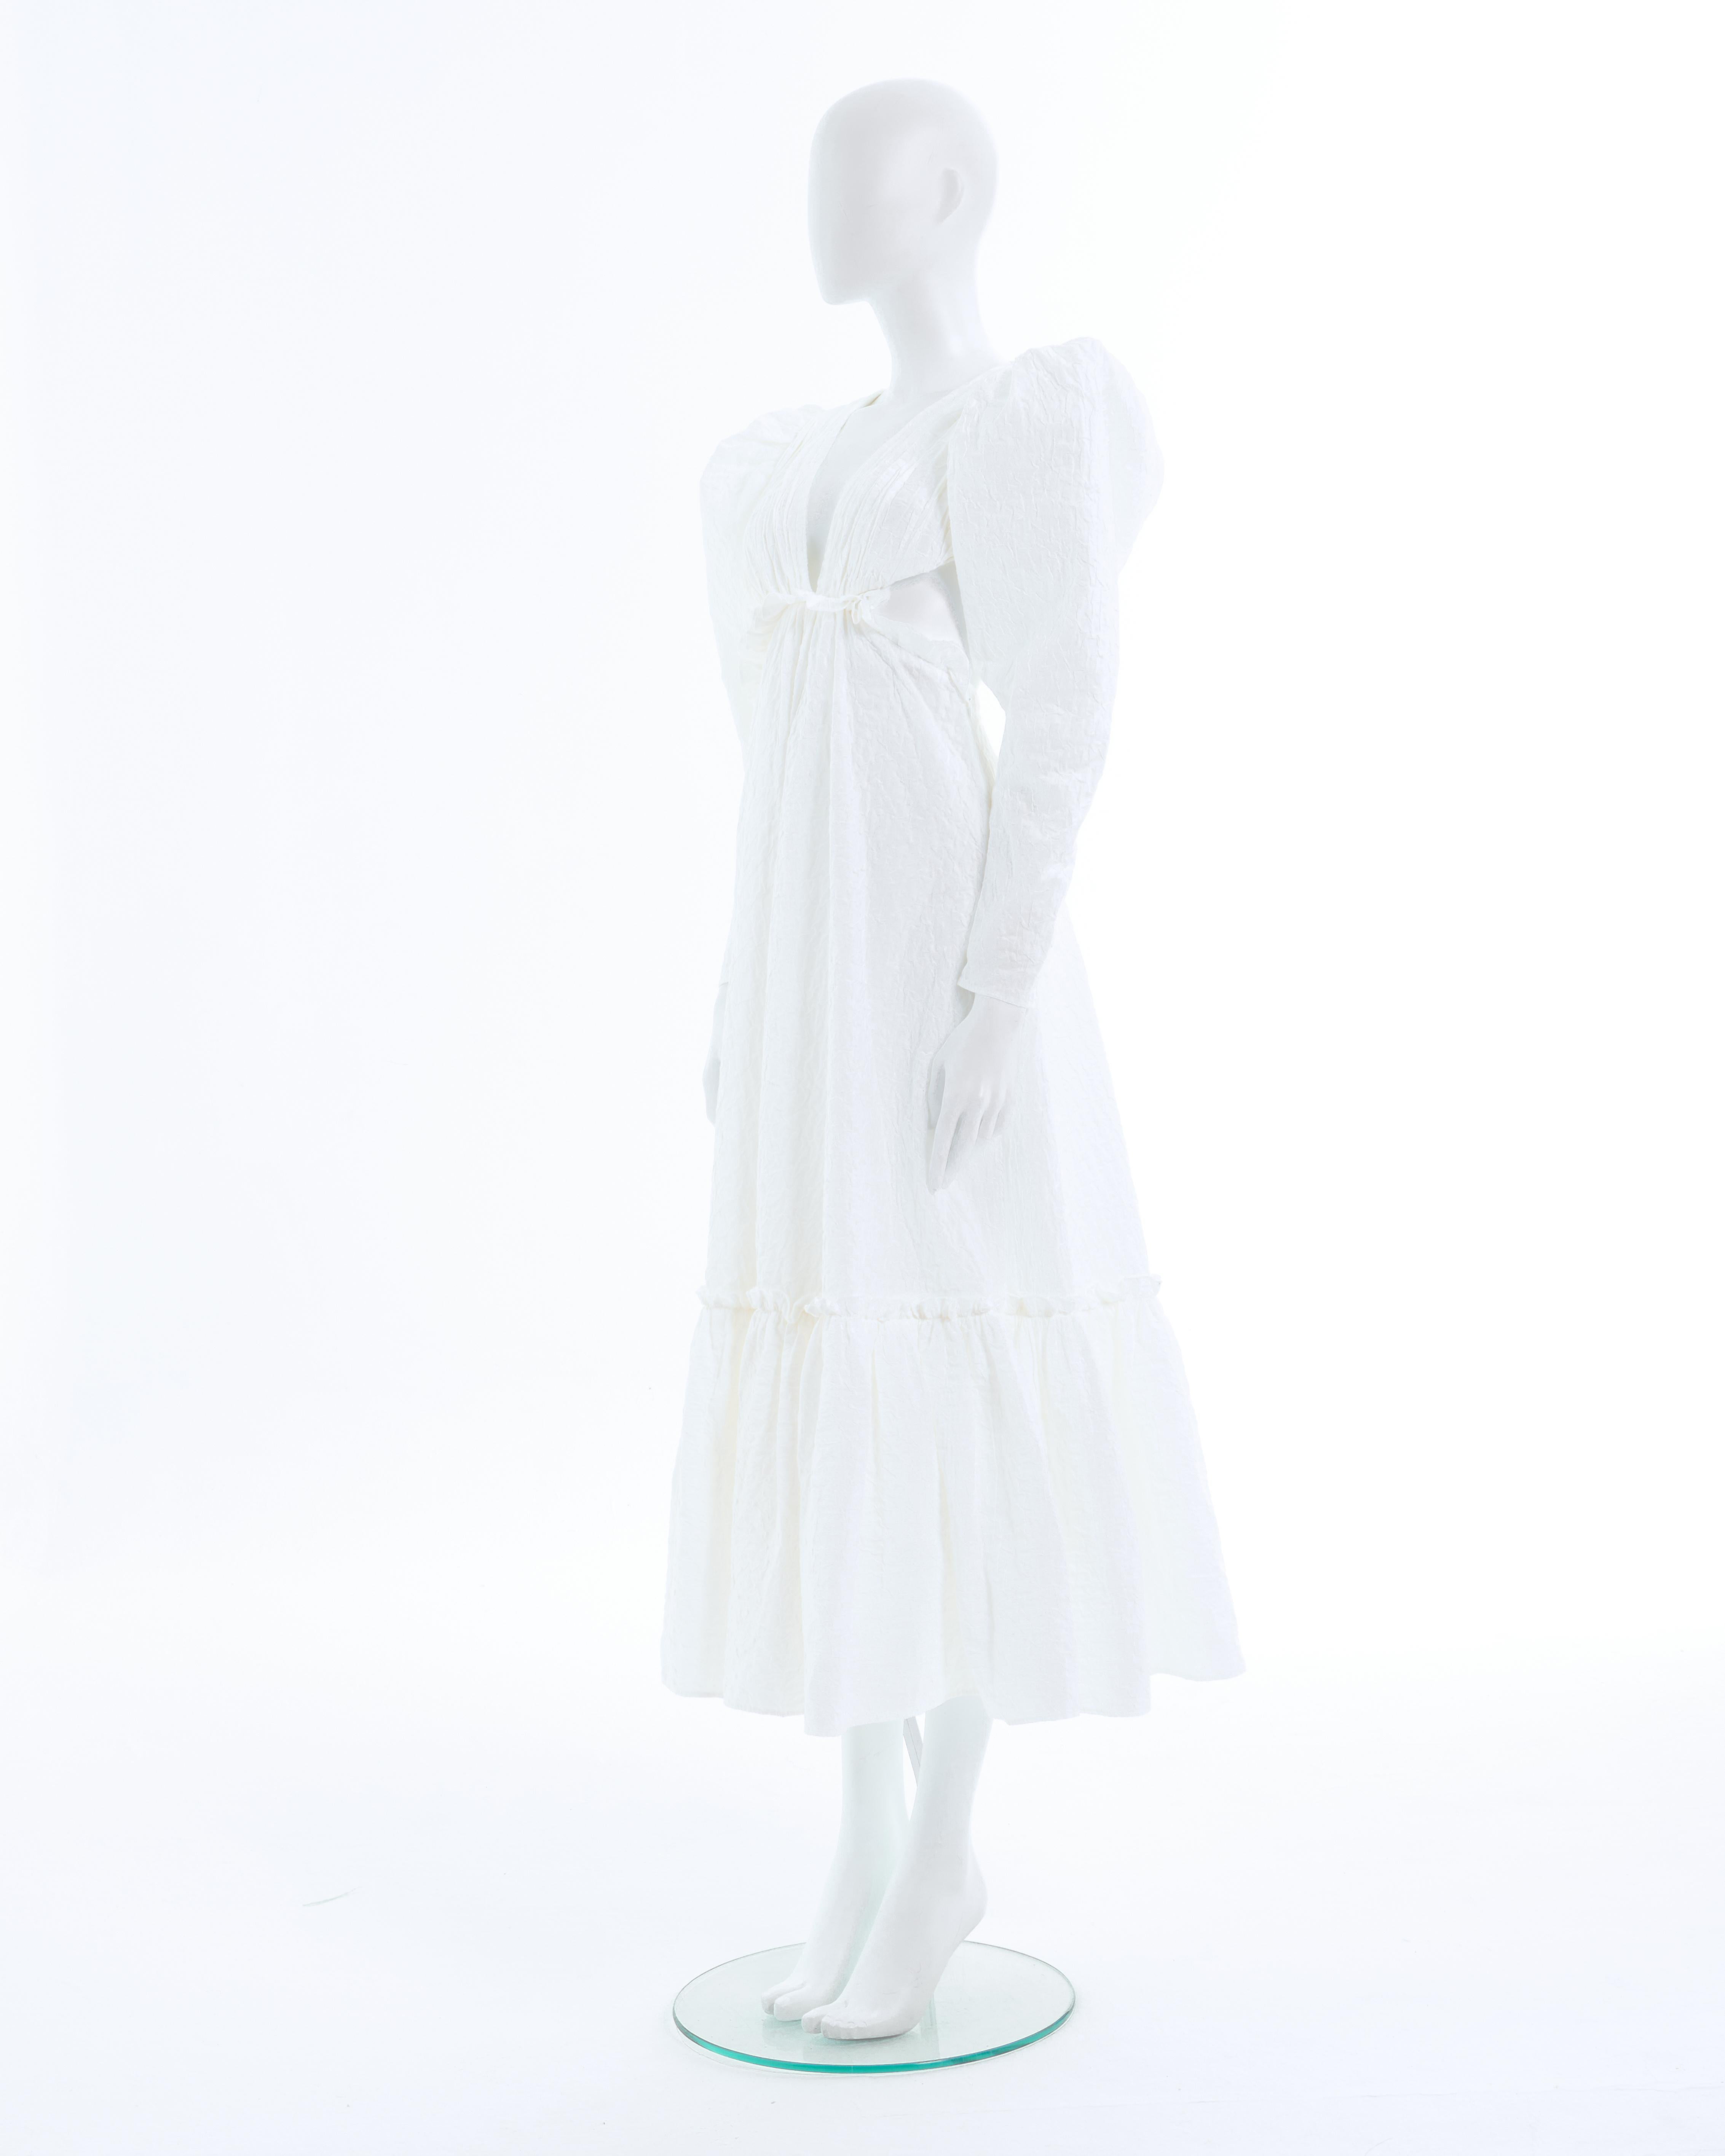 - Yves Saint Laurent designed by Tom Ford white lace-up cotton blend maxi dress
- Sold by Skof.Archive 
- Spring-Summer 2001 
- White cotton puff sleeve maxi dress
- Deep V-neck in front and back 
- Lace-up fastening back closure 
- Deliberately